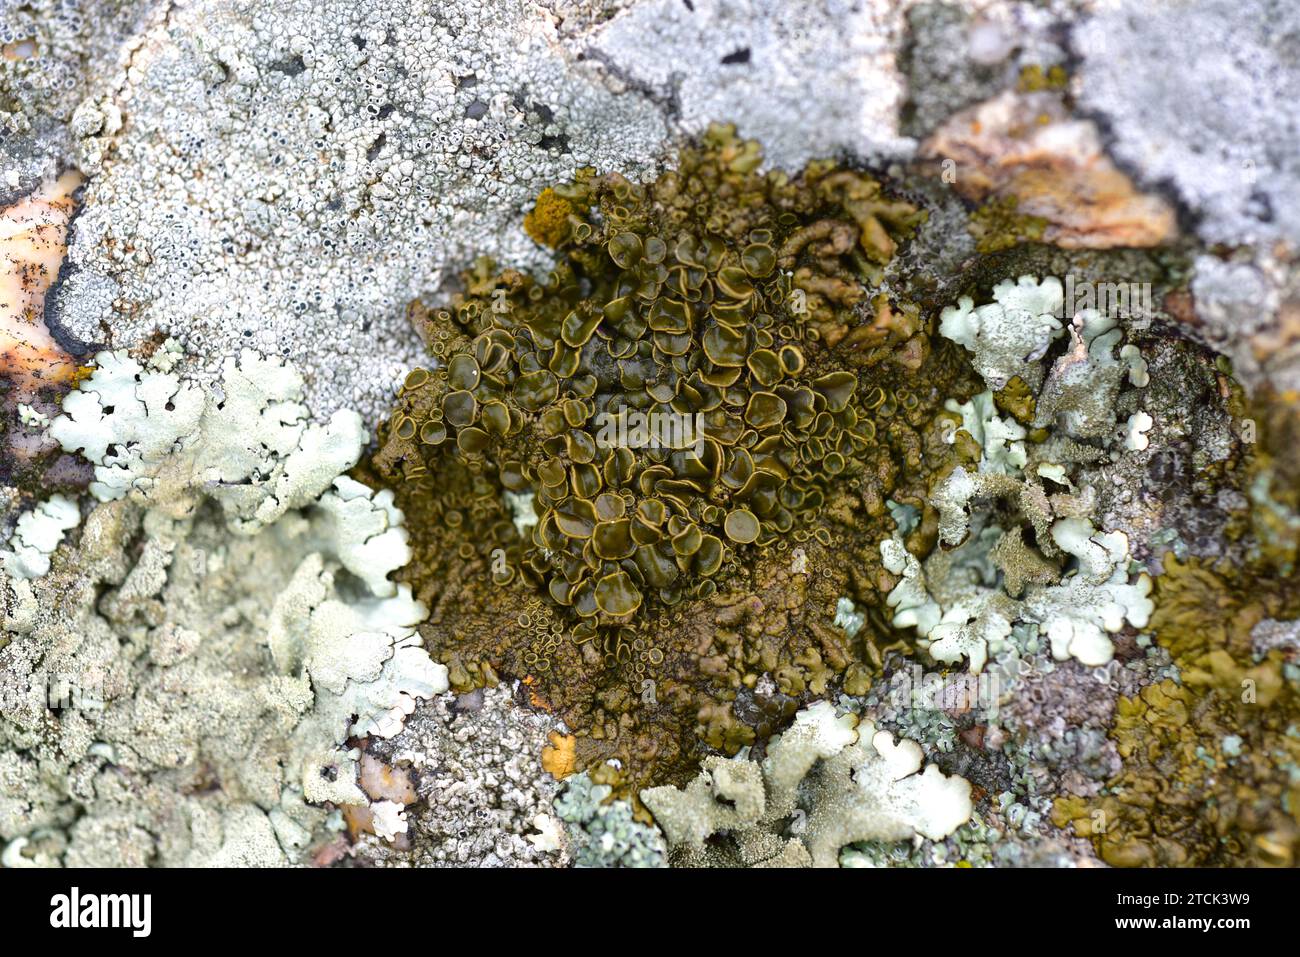 Parmelia pulla, Xanthoparmelia pulla or Neofuscelia pulla is a foliose lichen with brown-greenish apothecia. Hydrated sample. This photo was taken in Stock Photo